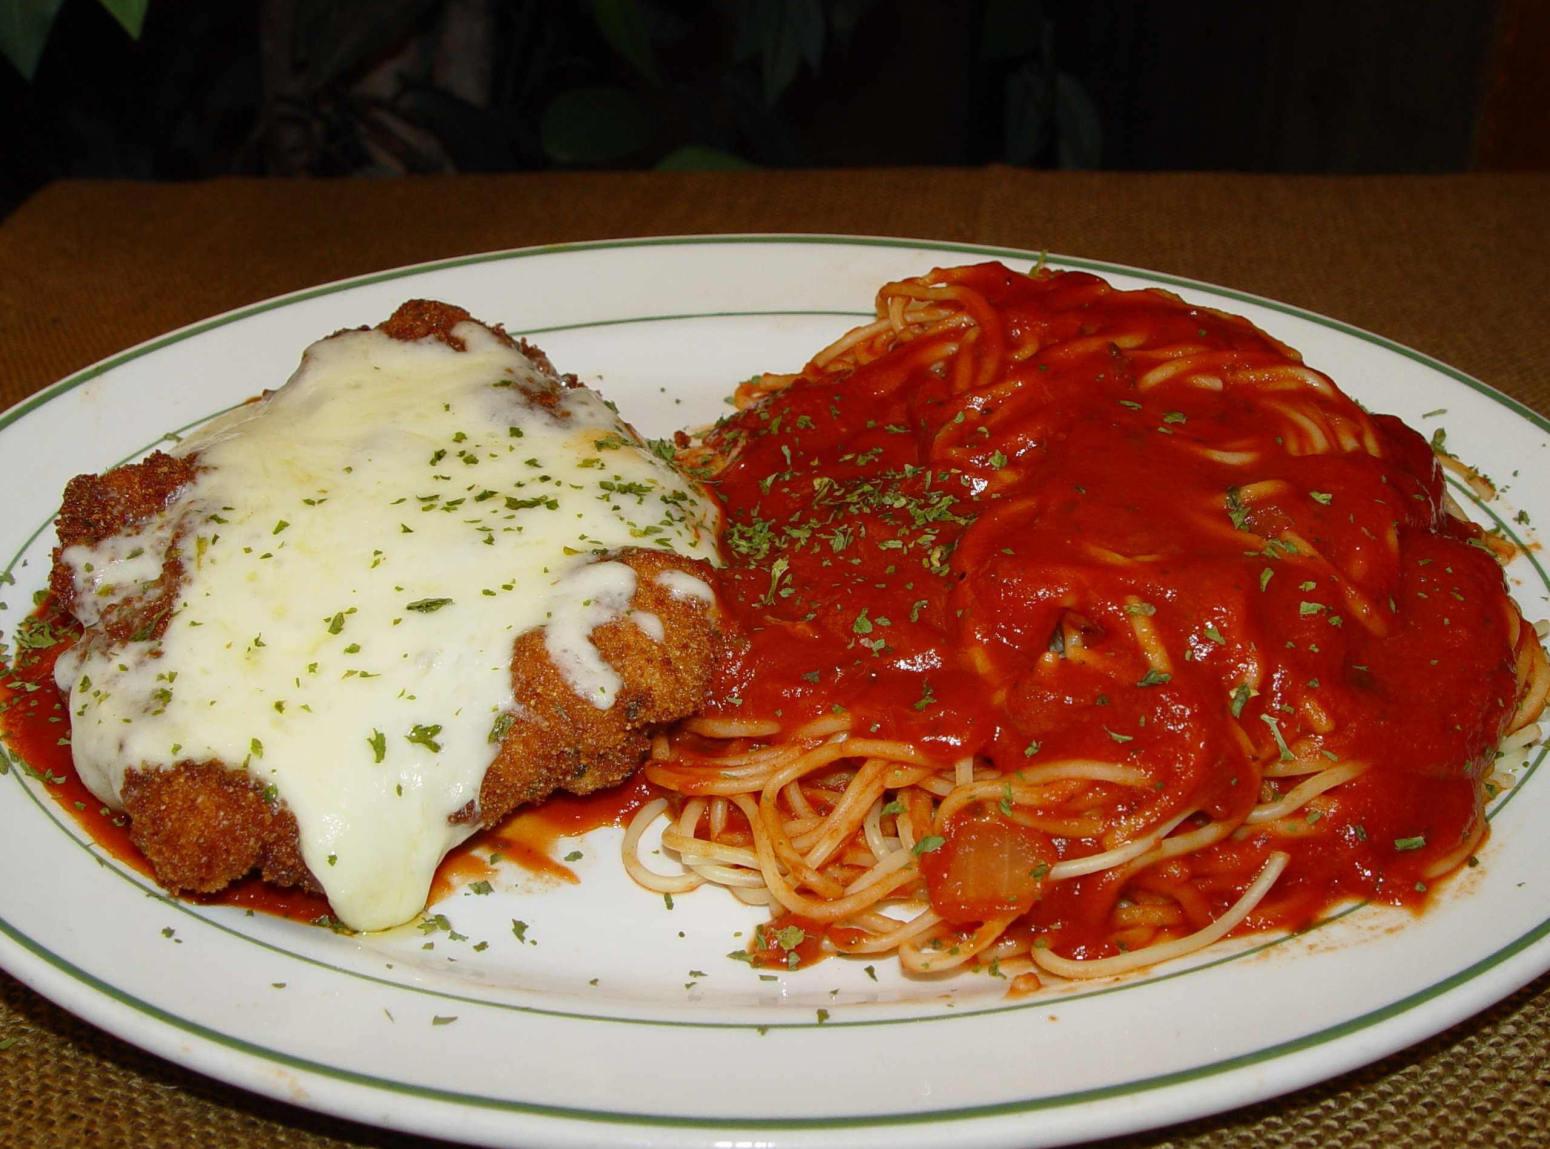 What side dishes go with chicken parmesan? | ehow